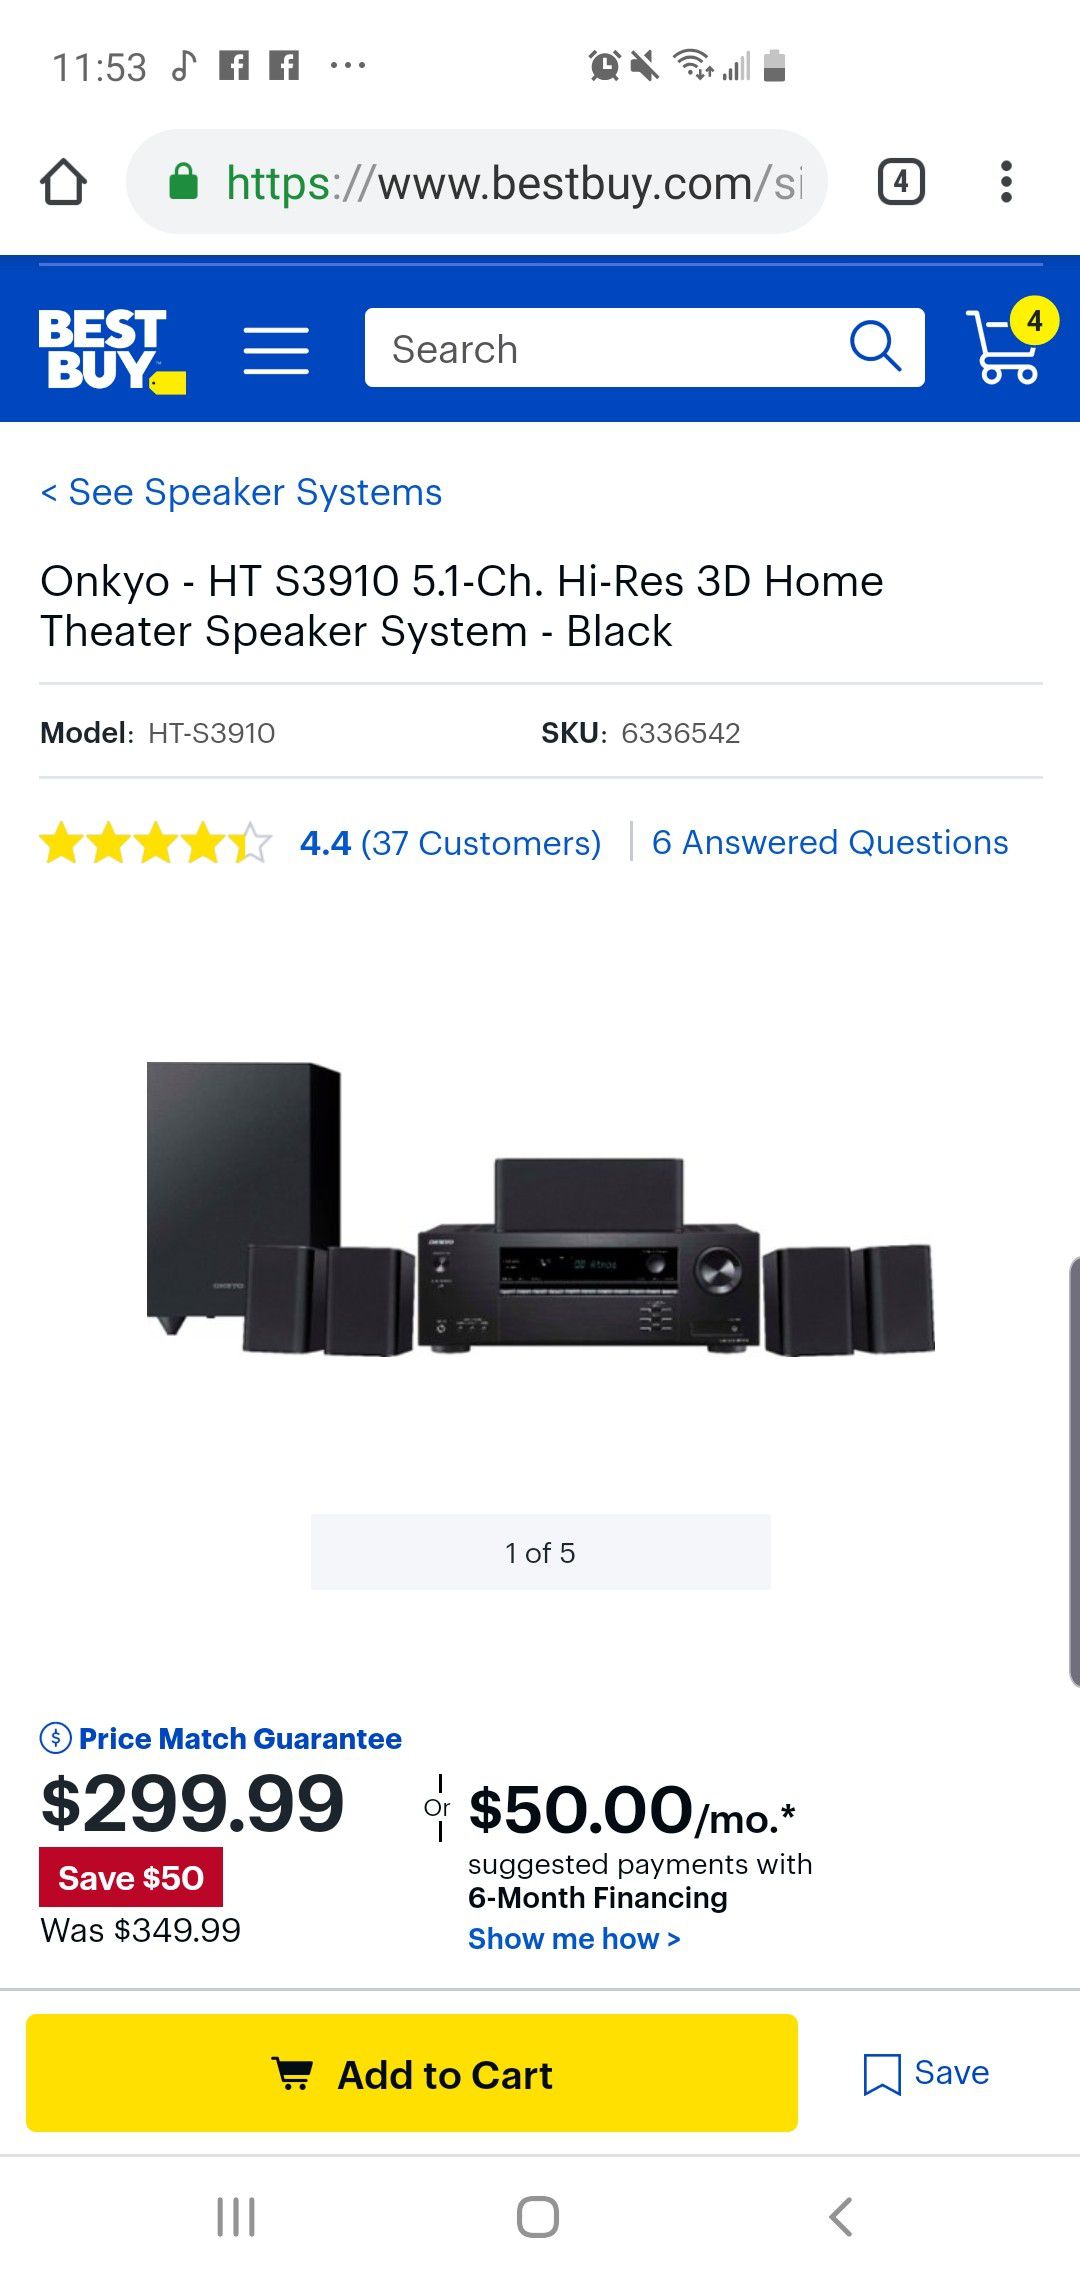 Onkyo - HT S3910 5.1-Ch. Hi-Res 3D Home Theater Speaker System